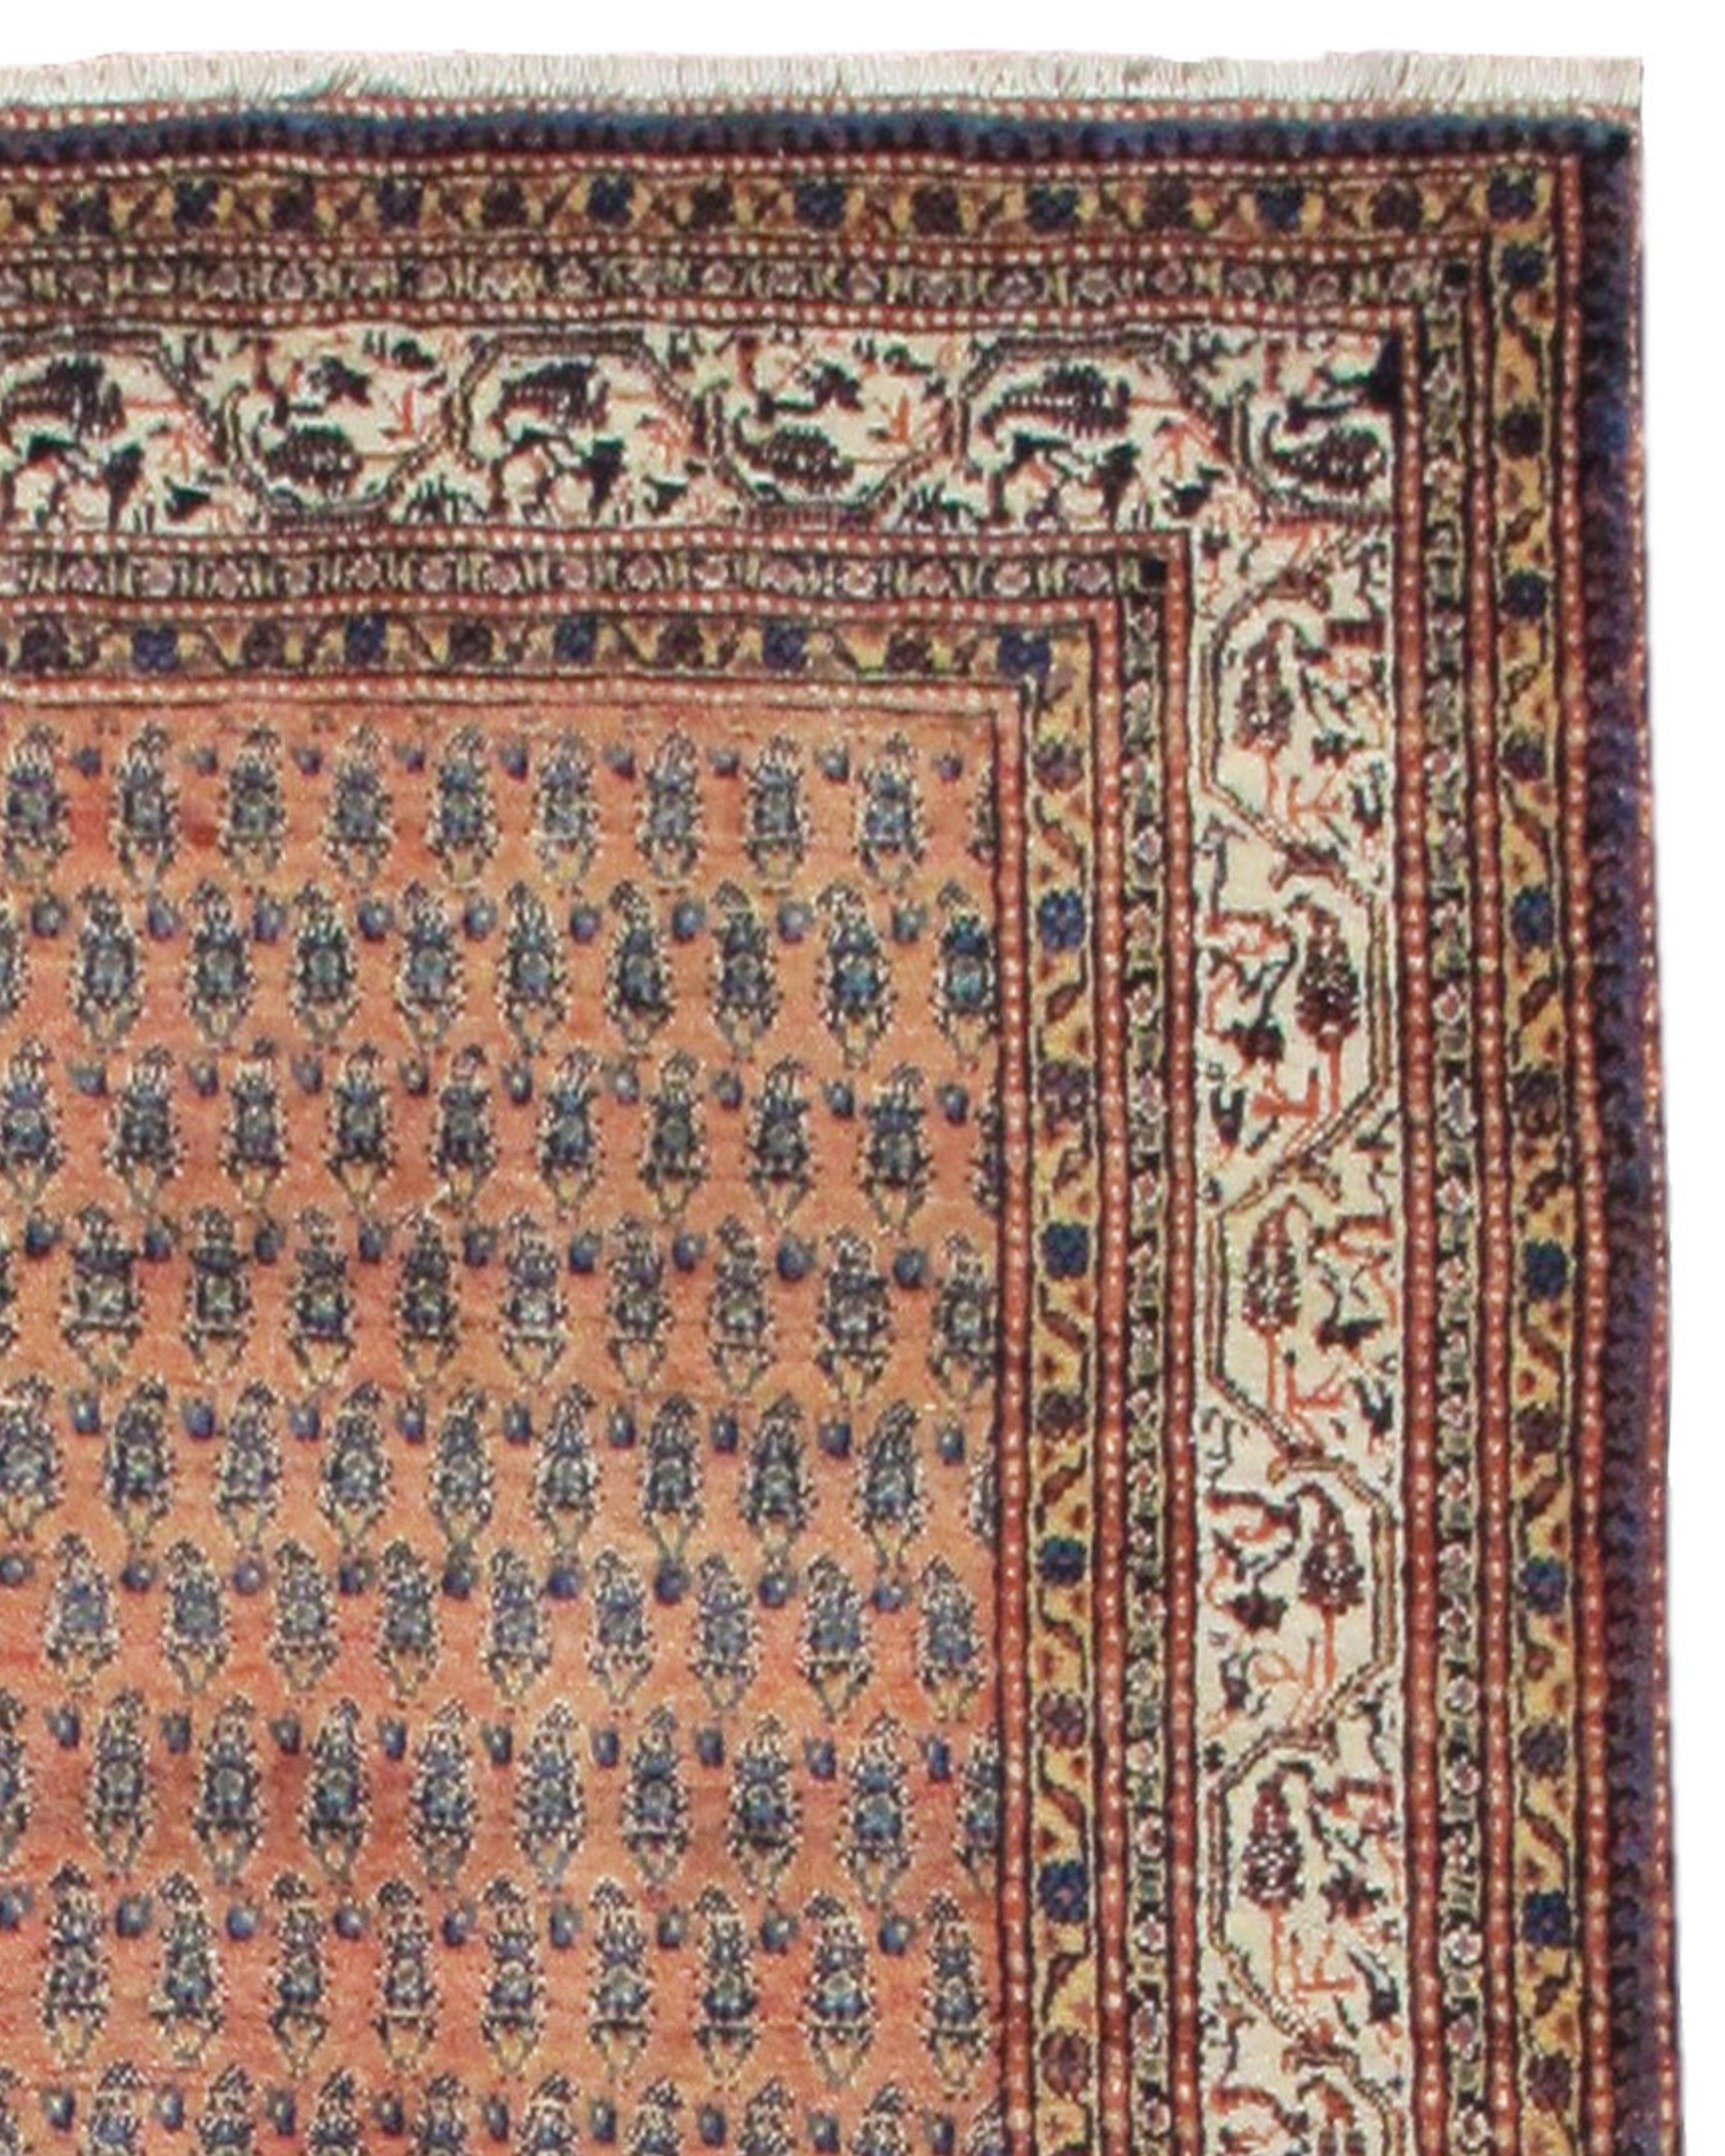 Northwest Persian Village Rug, Early 20th Century

This rug features a “Boteh” design and is in excellent condition.

Additional Information:
Dimensions: 4'6